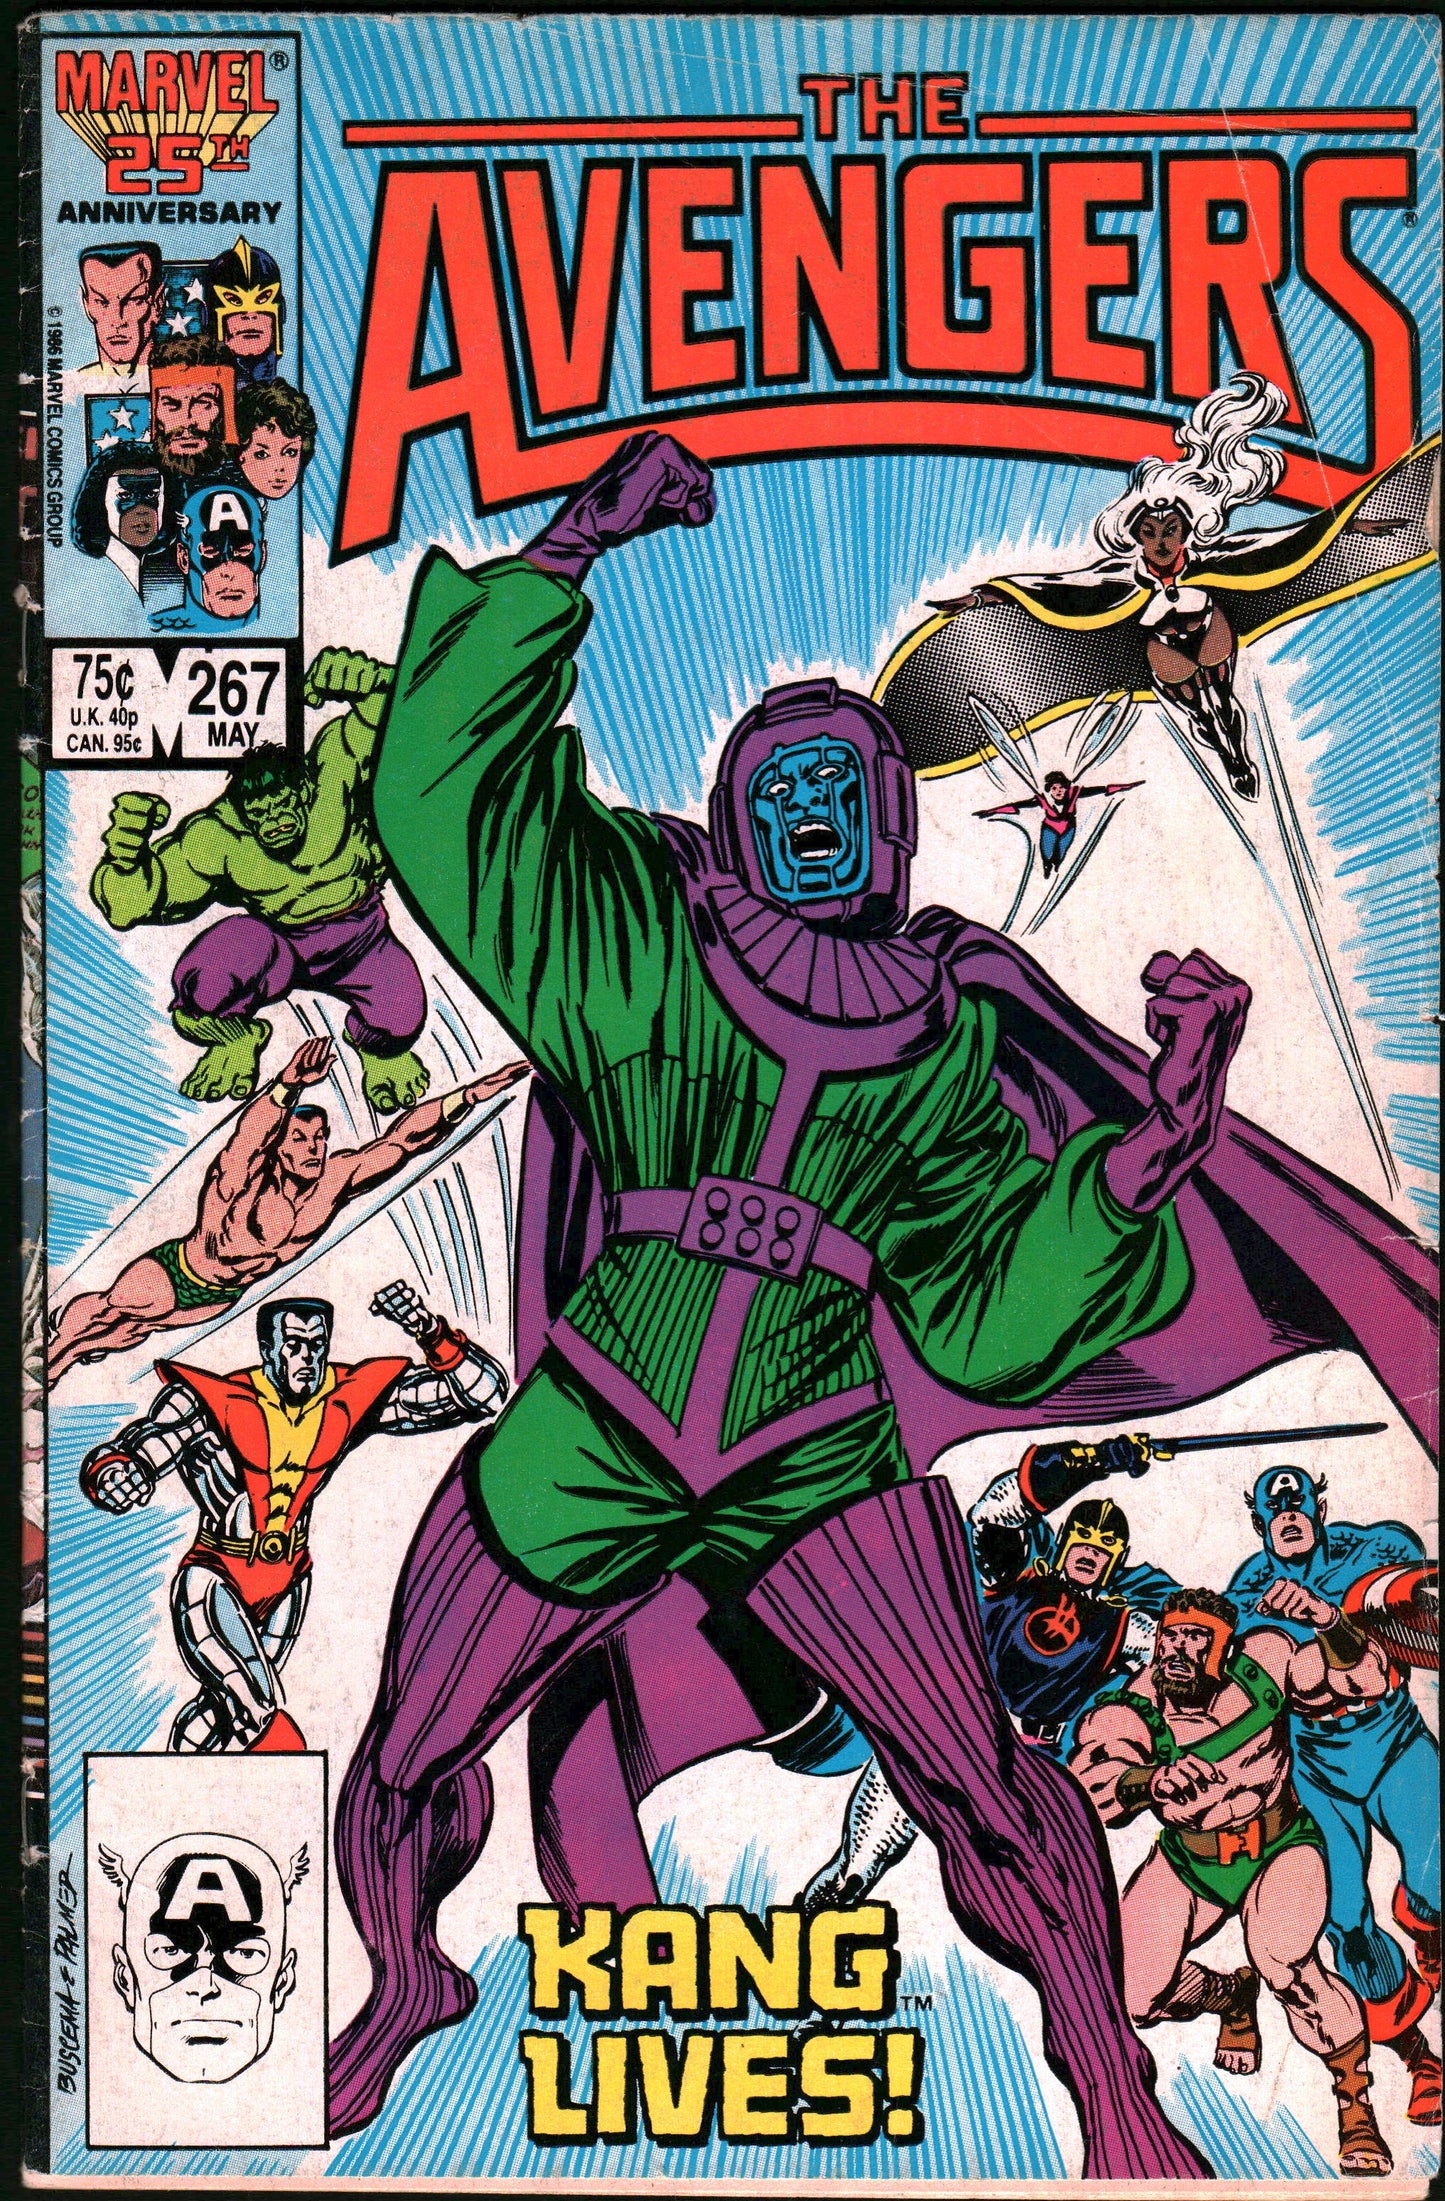 Avengers #267 (5/86) - 1st App. Council of Kangs - The One Stop Shop Comics & Games